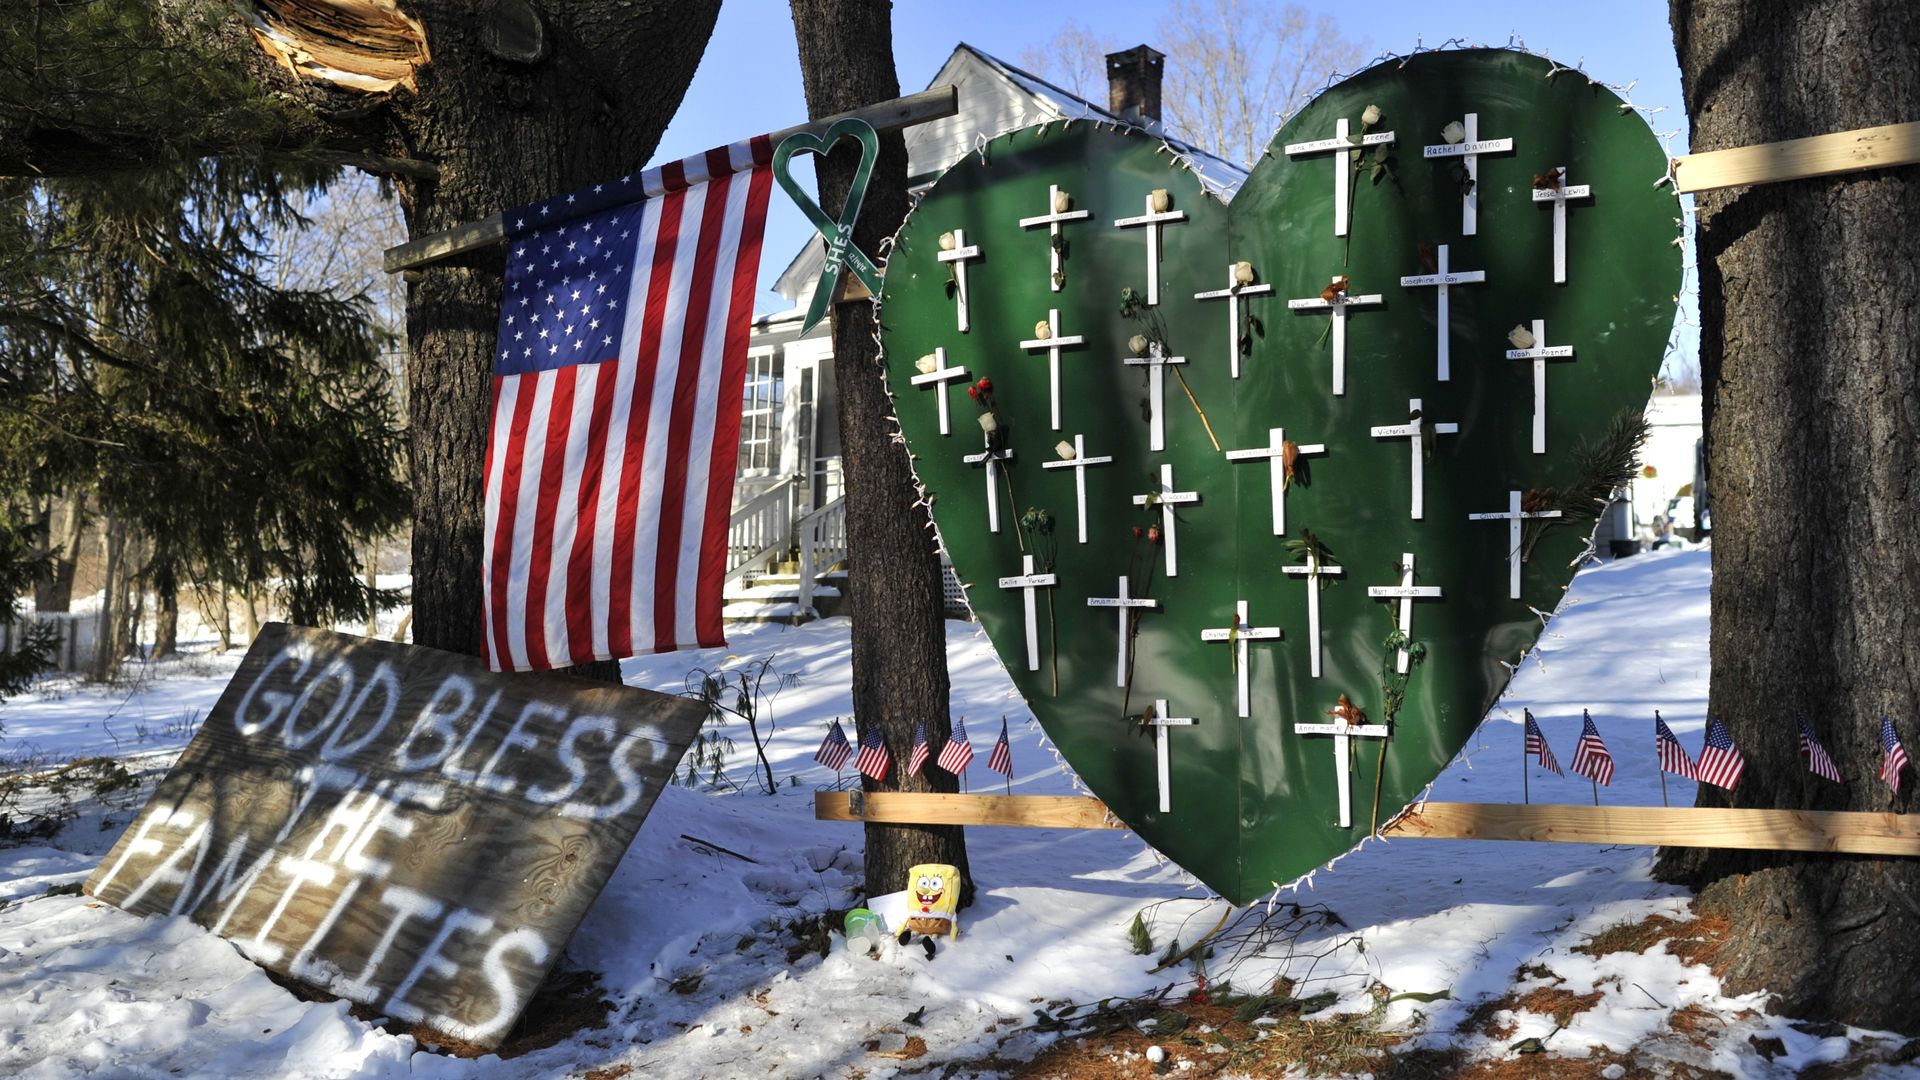 Some of the remaining memorial items to Sandy Hook Elementry students and staff who died are viewed in Newtown, Connecticut on January 3, 2013. 